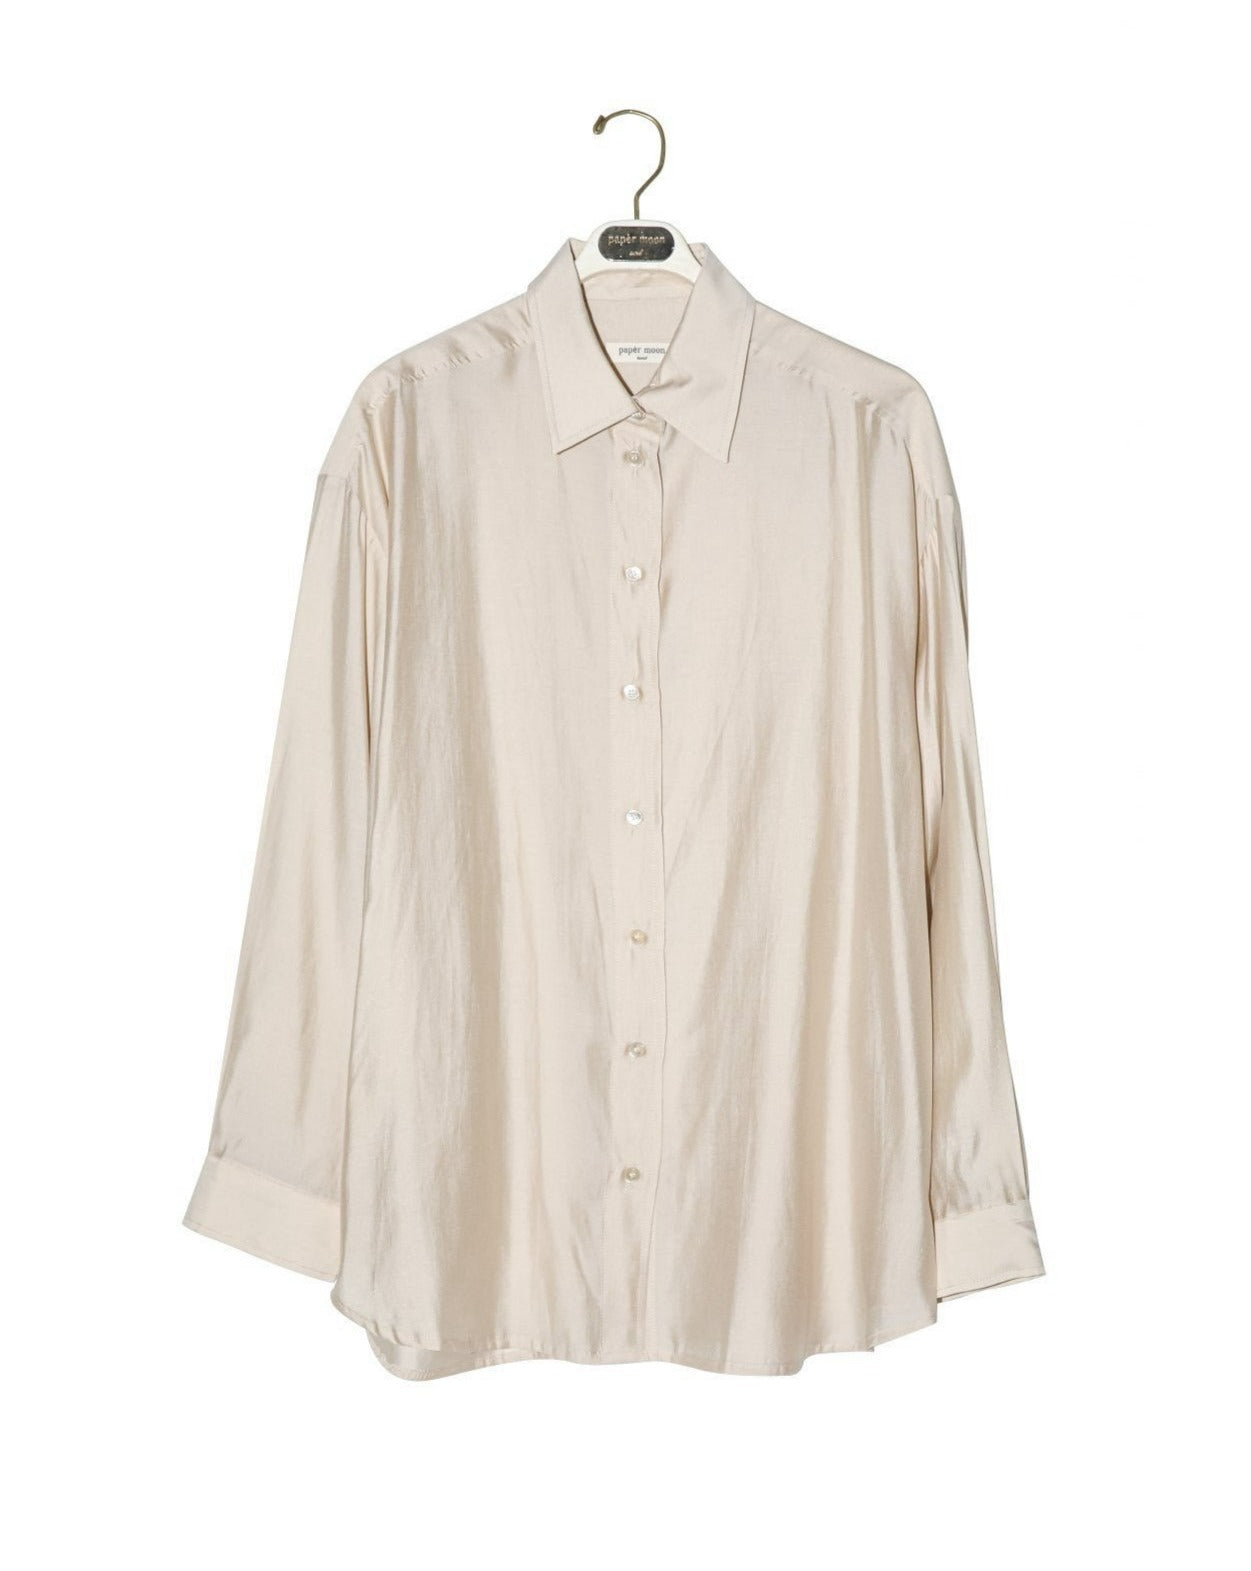 【PAPERMOON ペーパームーン】SS / Sheer Silky Classic Button Down Shirt